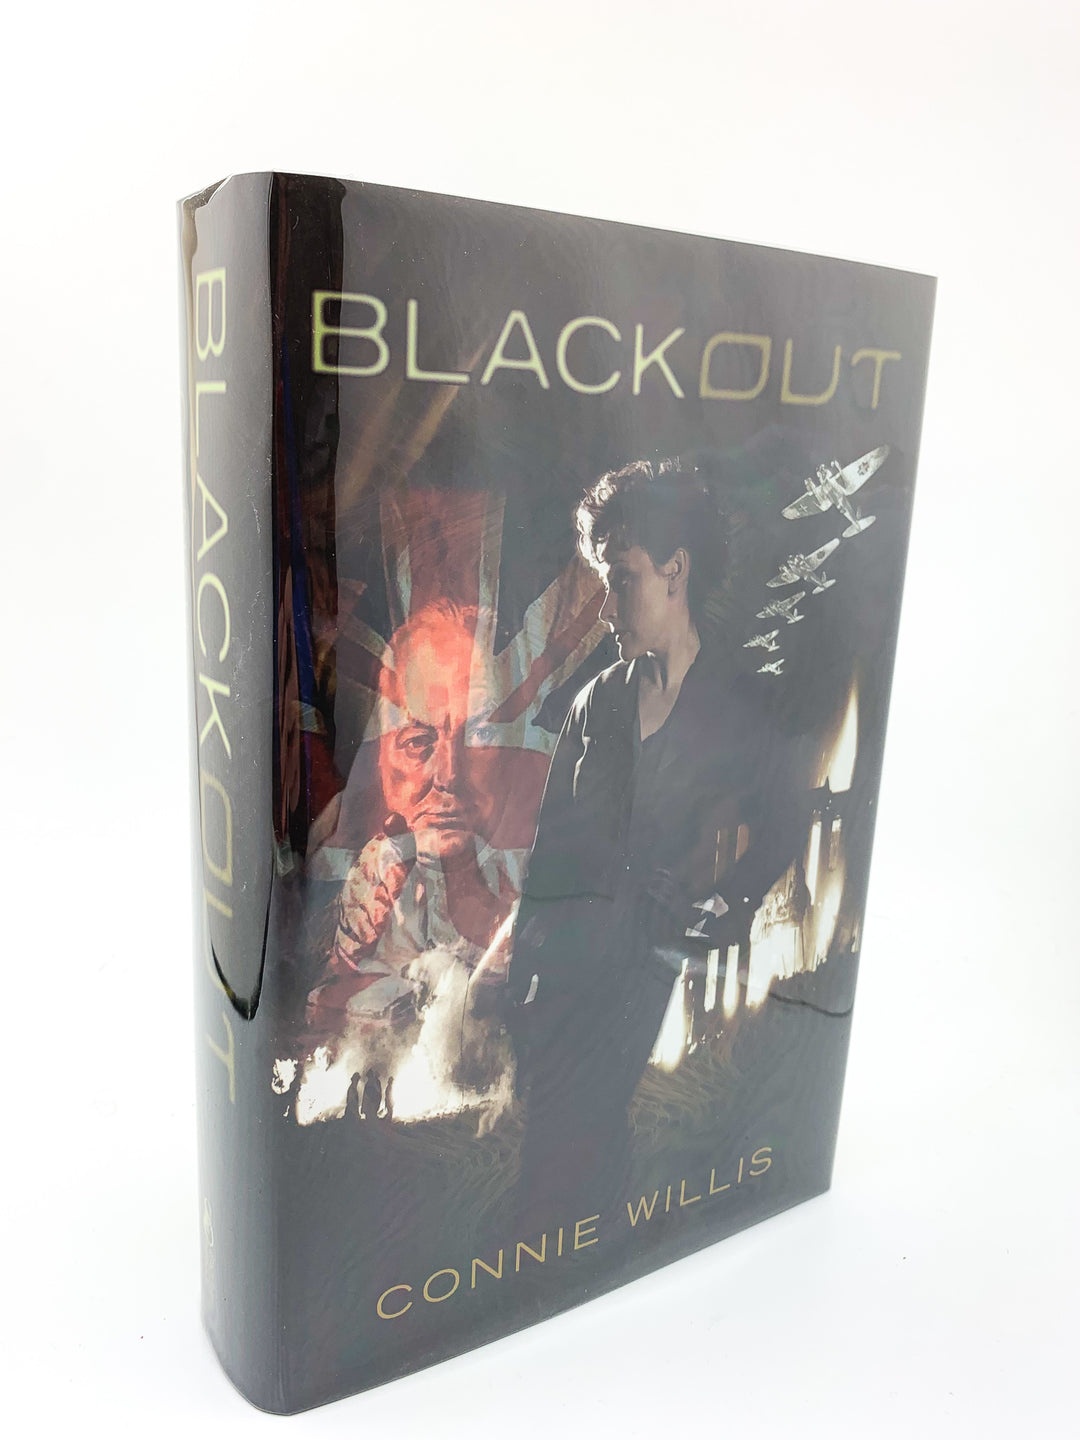 Willis, Connie - Blackout - SIGNED | front cover